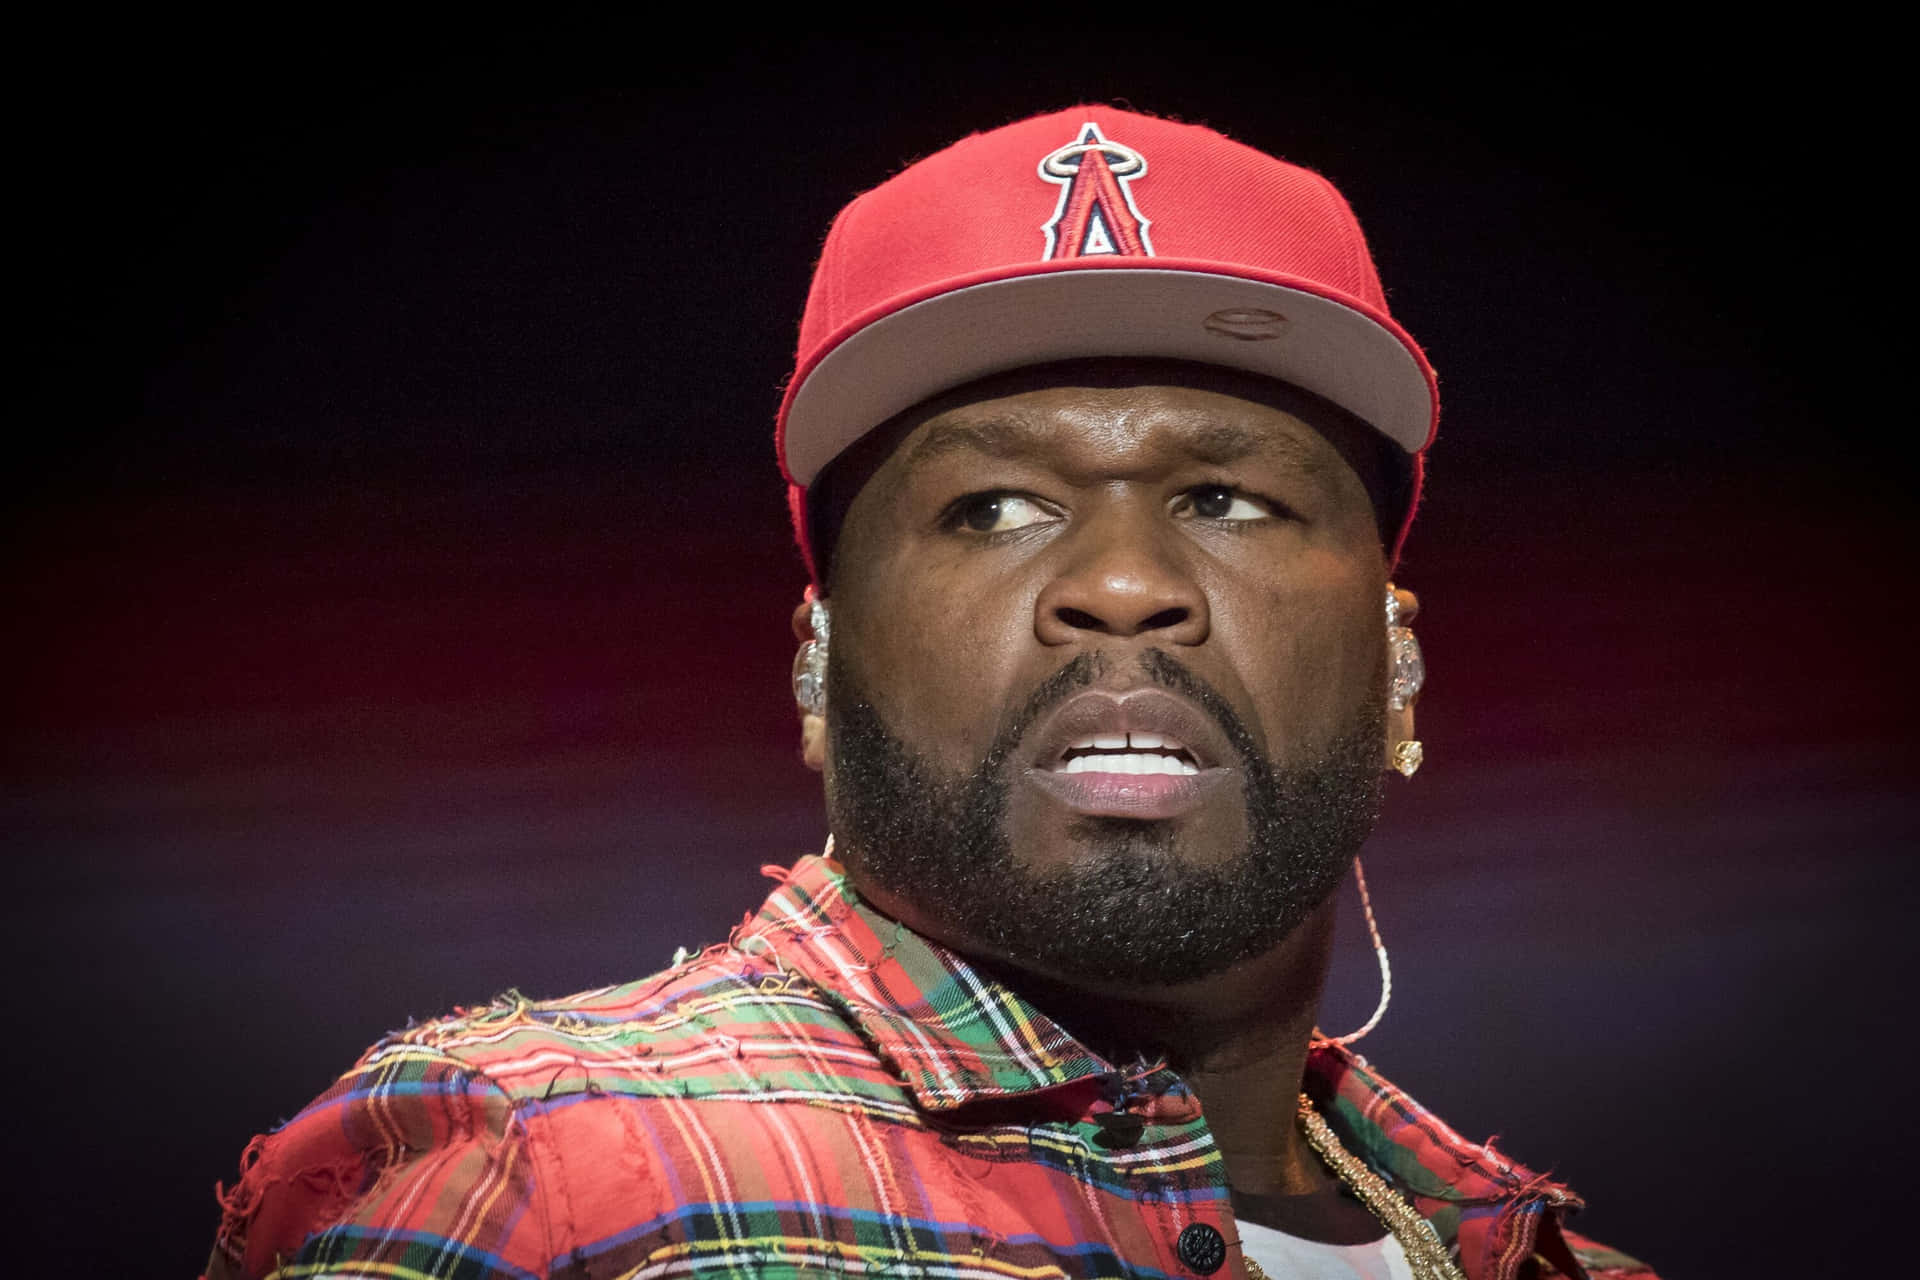 50 Cent attends the BANGLADESH Music Festival